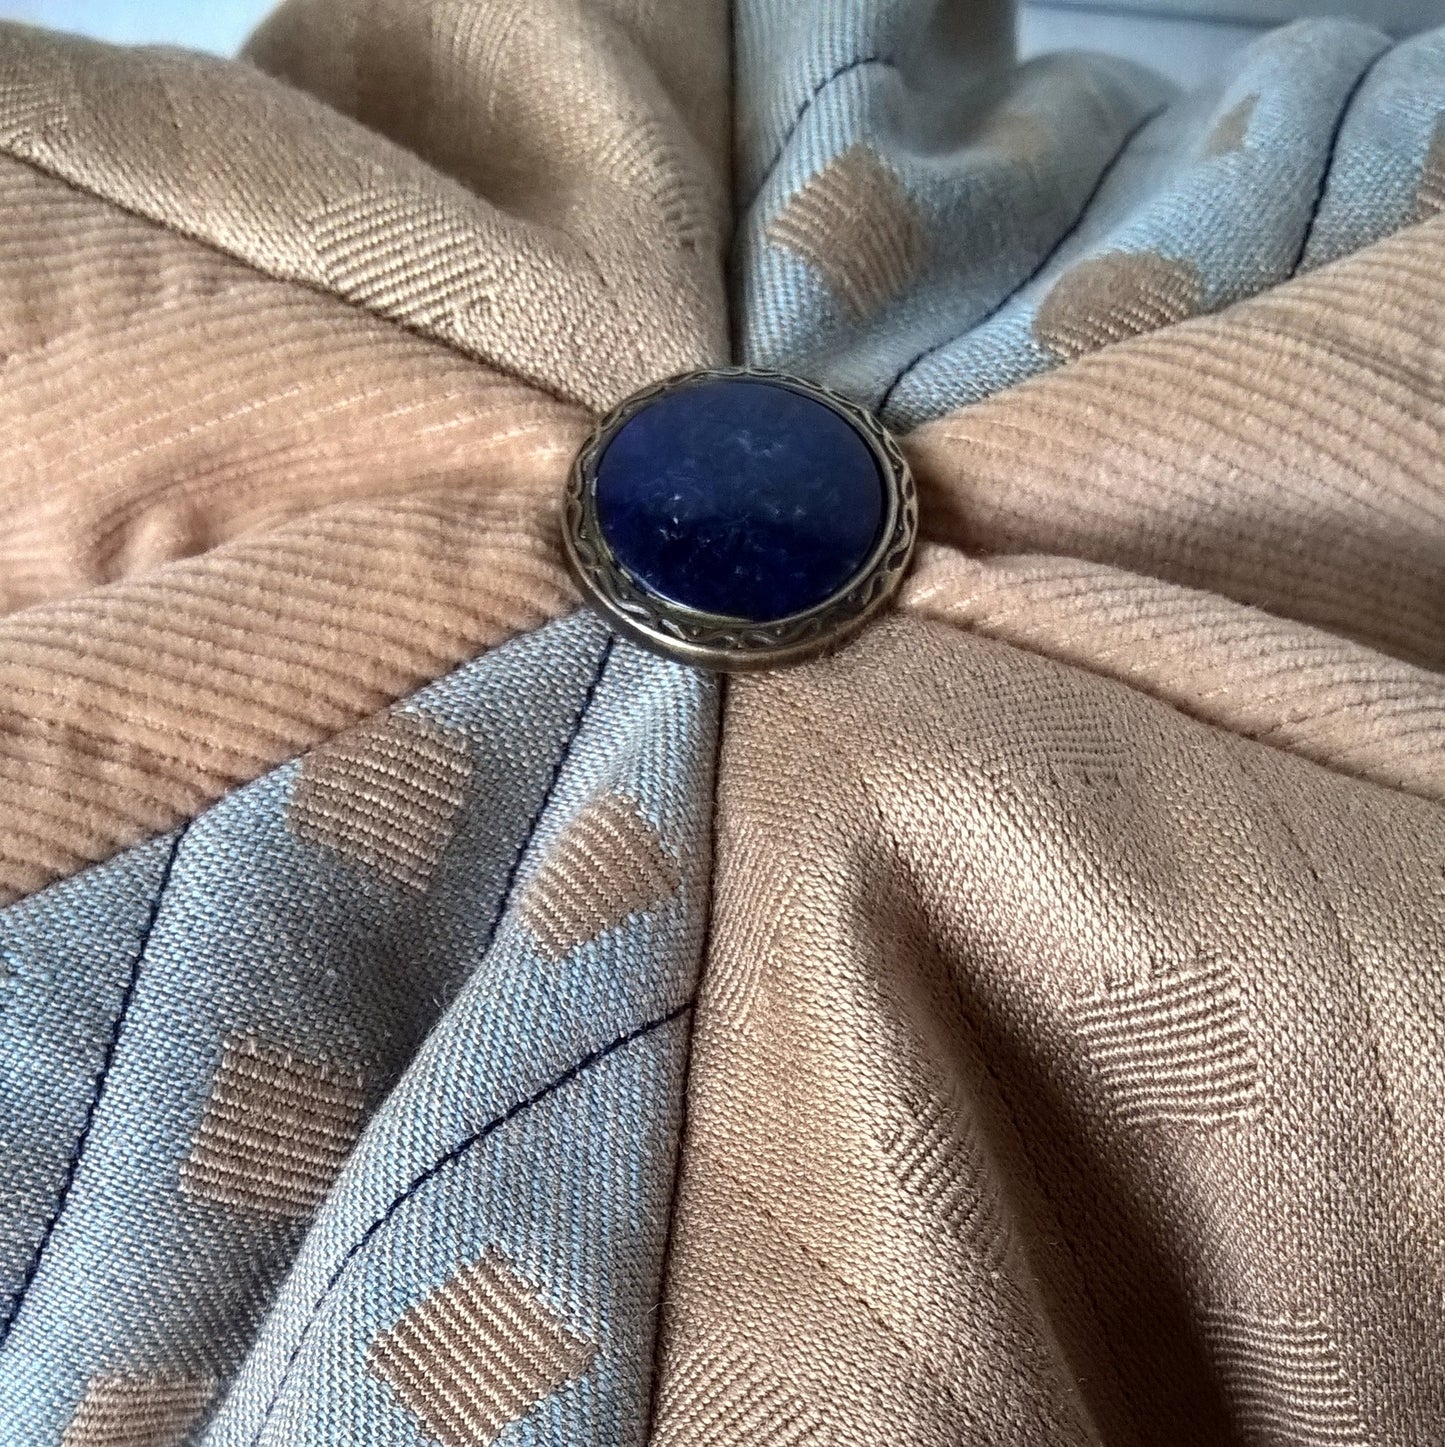 The centre tip is topped with a navy blue vintage button